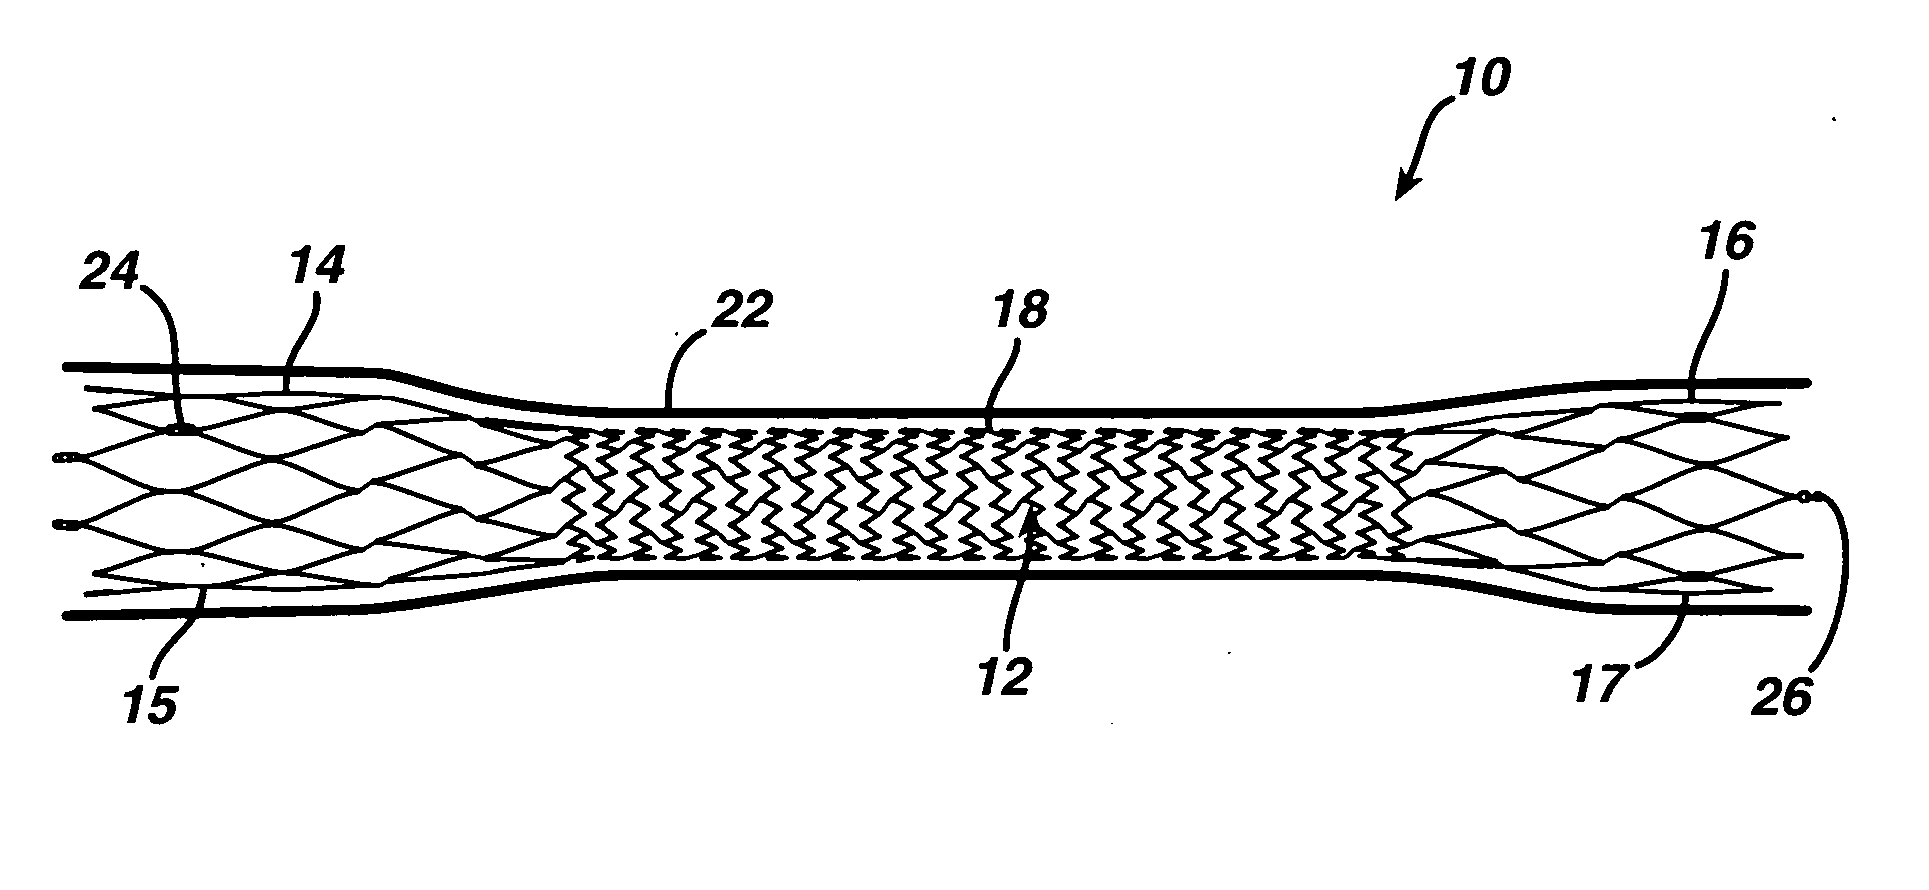 Prosthesis comprising dual tapered stent